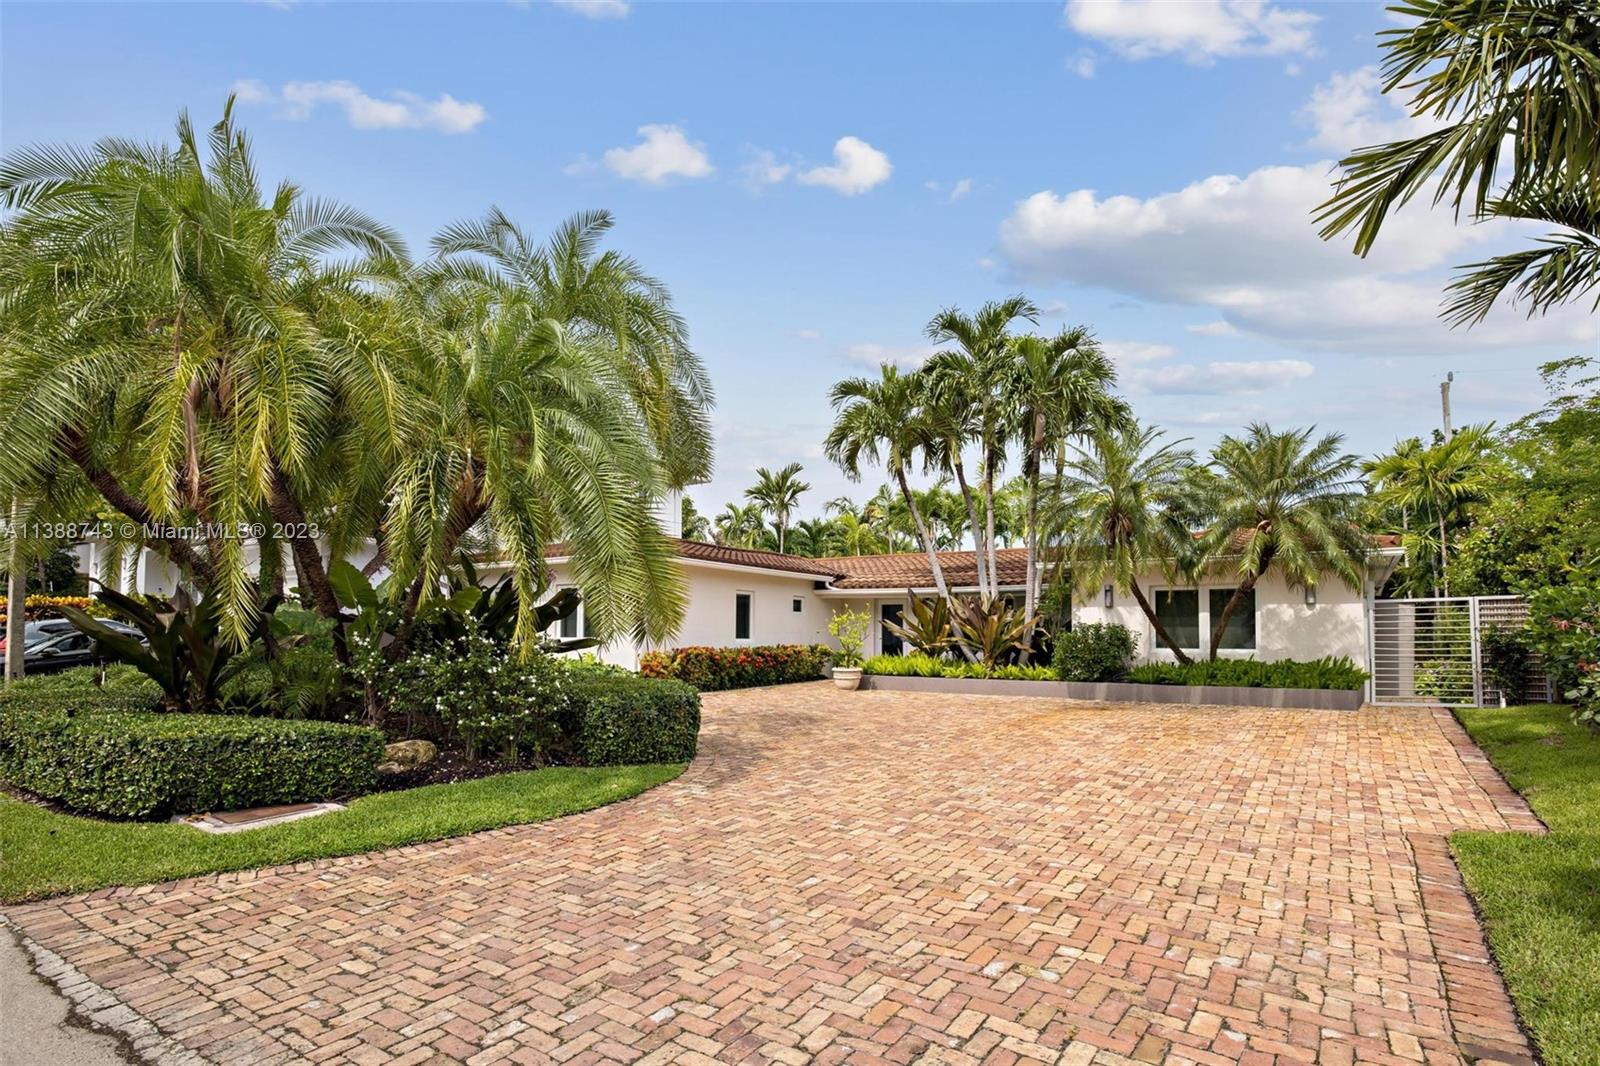 670 Allendale Rd Rd, Key Biscayne, Miami-Dade County, Florida - 5 Bedrooms  
5 Bathrooms - 